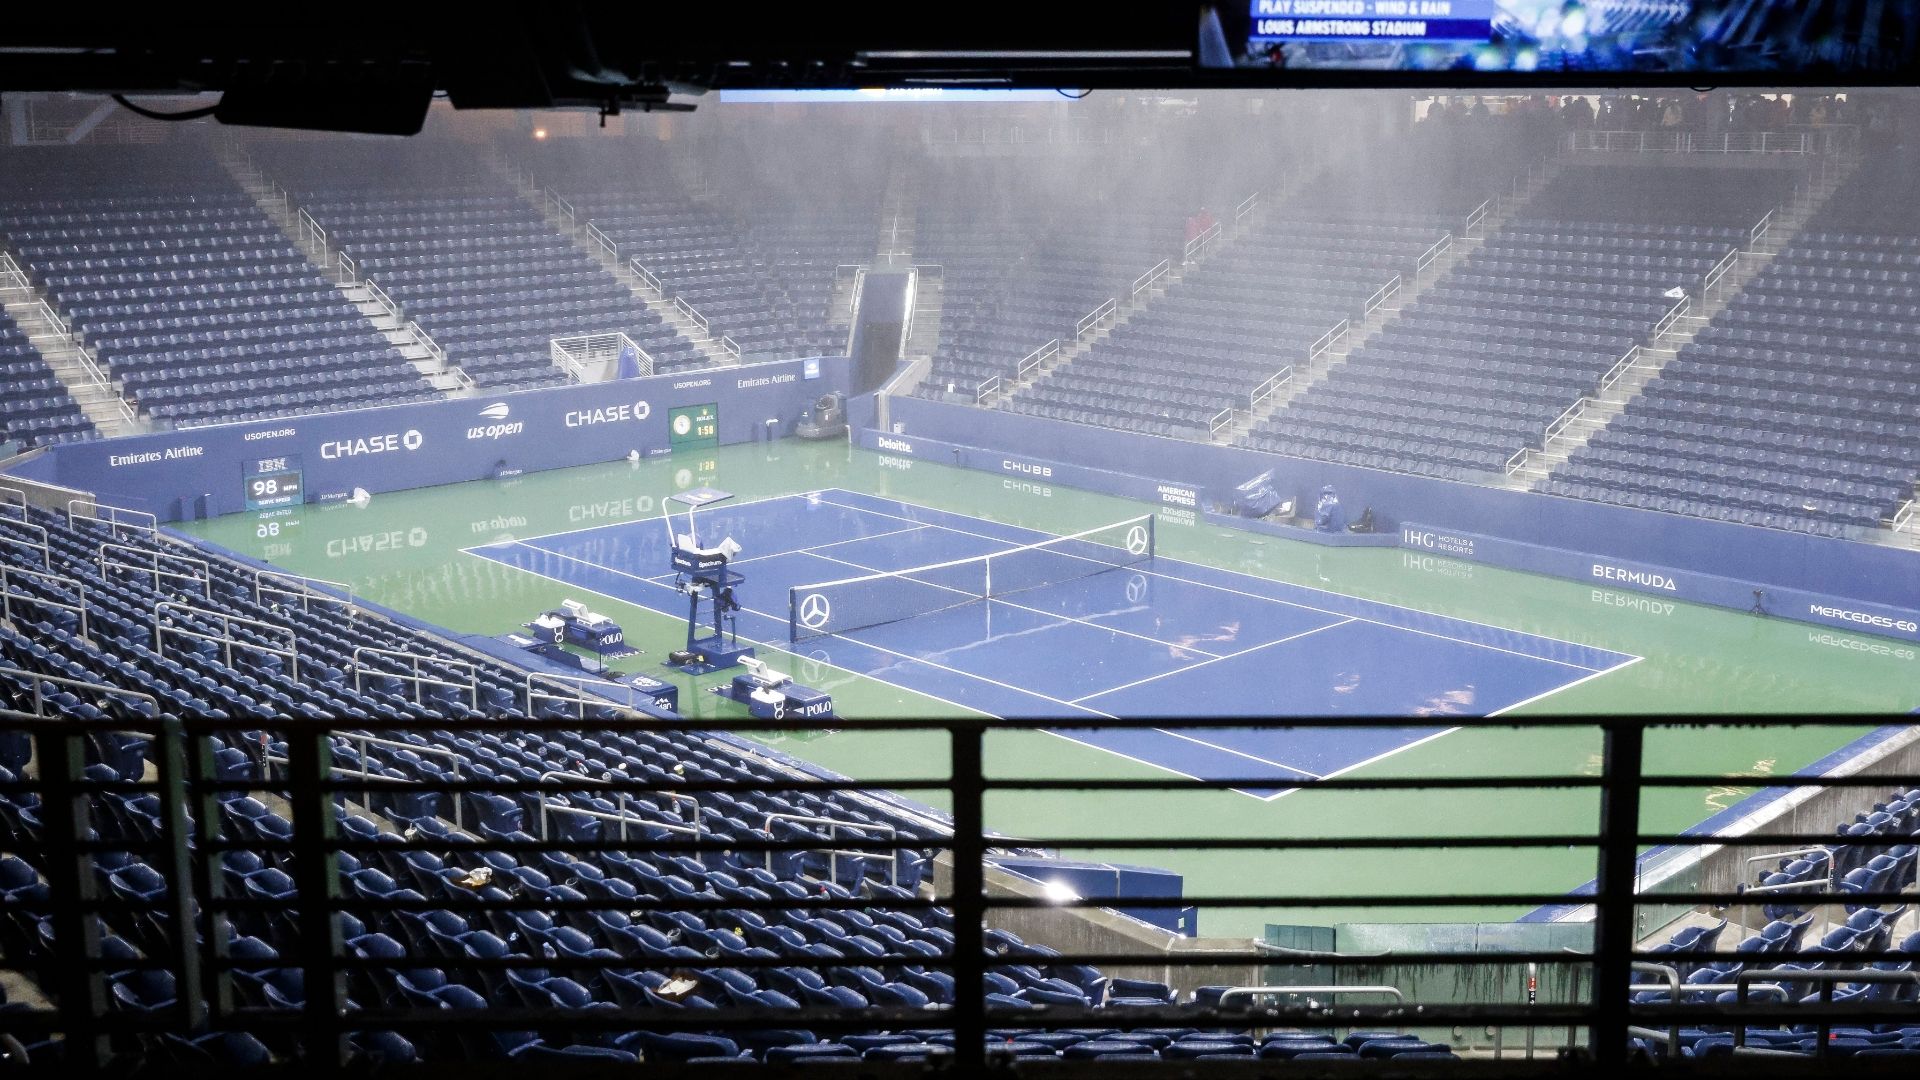 Weather disrupts play at US Open ESPN Video